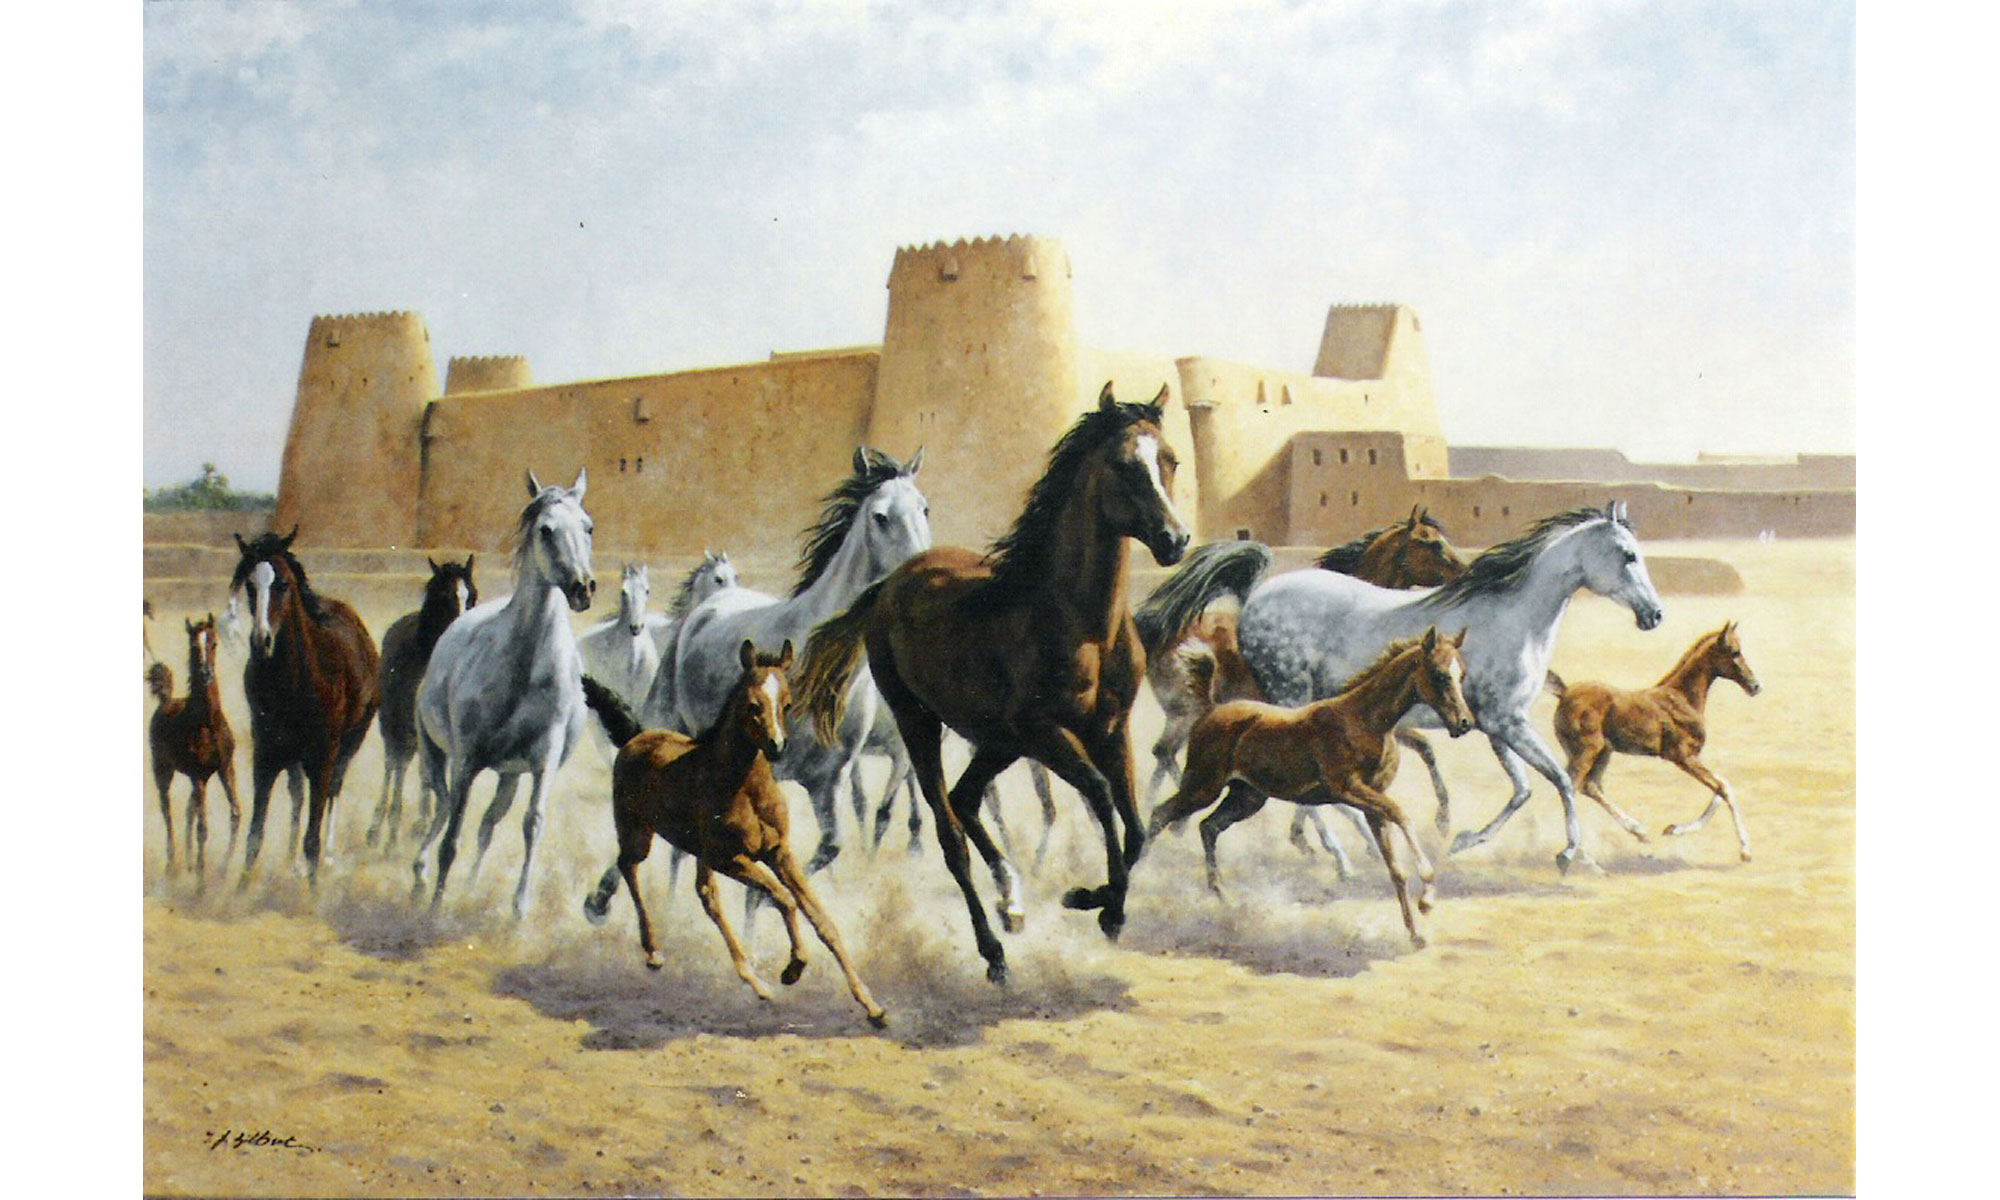 Stables at Hofuf Painting by Terence J Gilbert Oil on Board